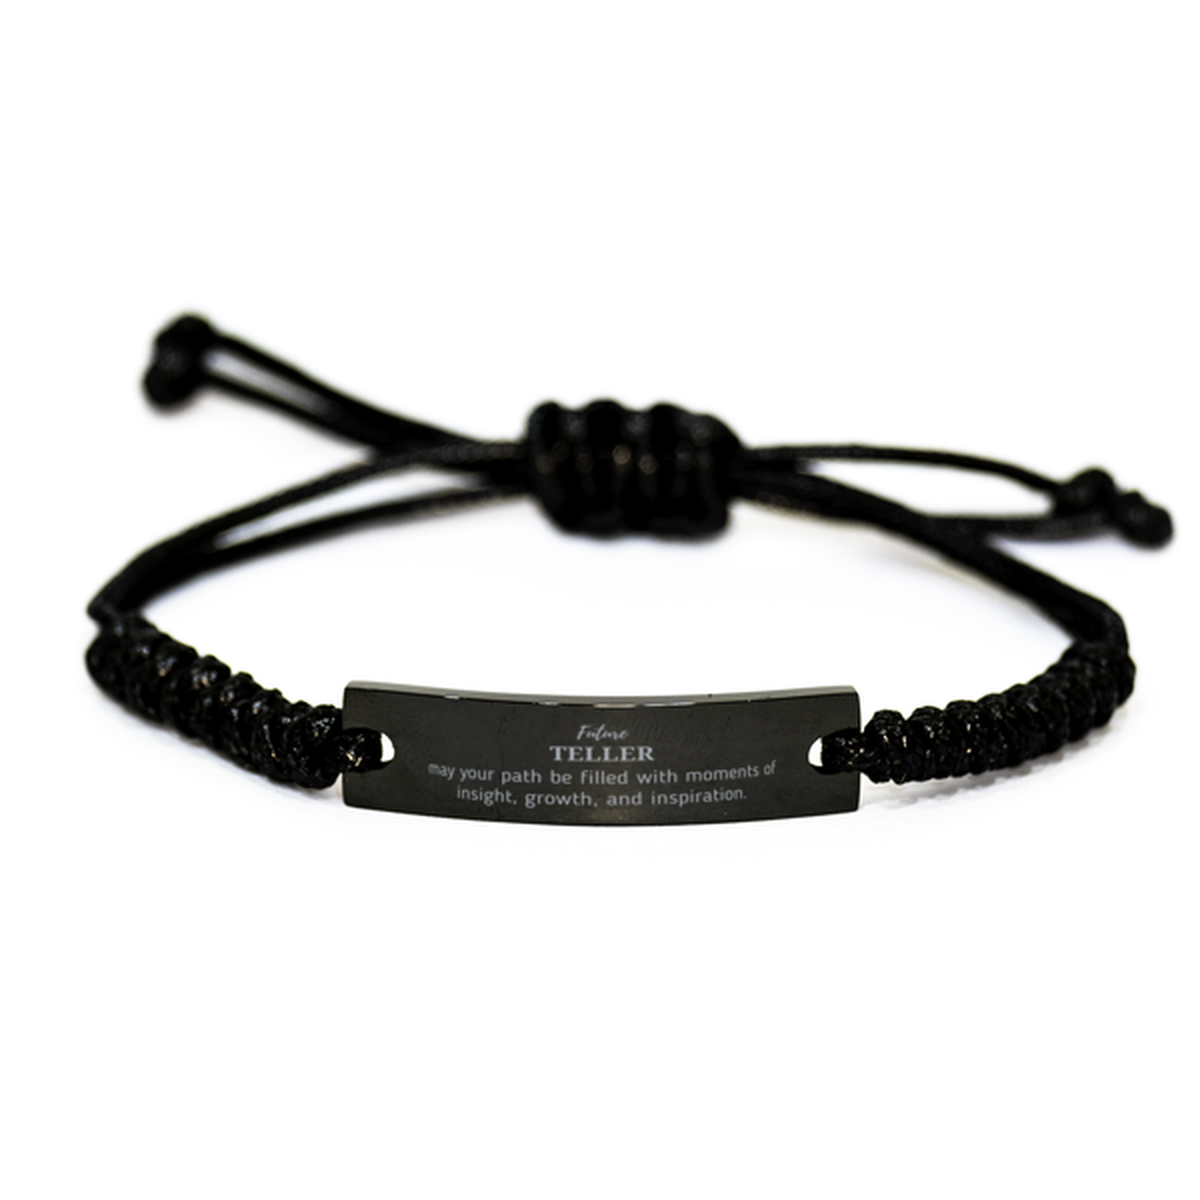 Future Teller Gifts, May your path be filled with moments of insight, Graduation Gifts for New Teller, Christmas Unique Black Rope Bracelet For Men, Women, Friends